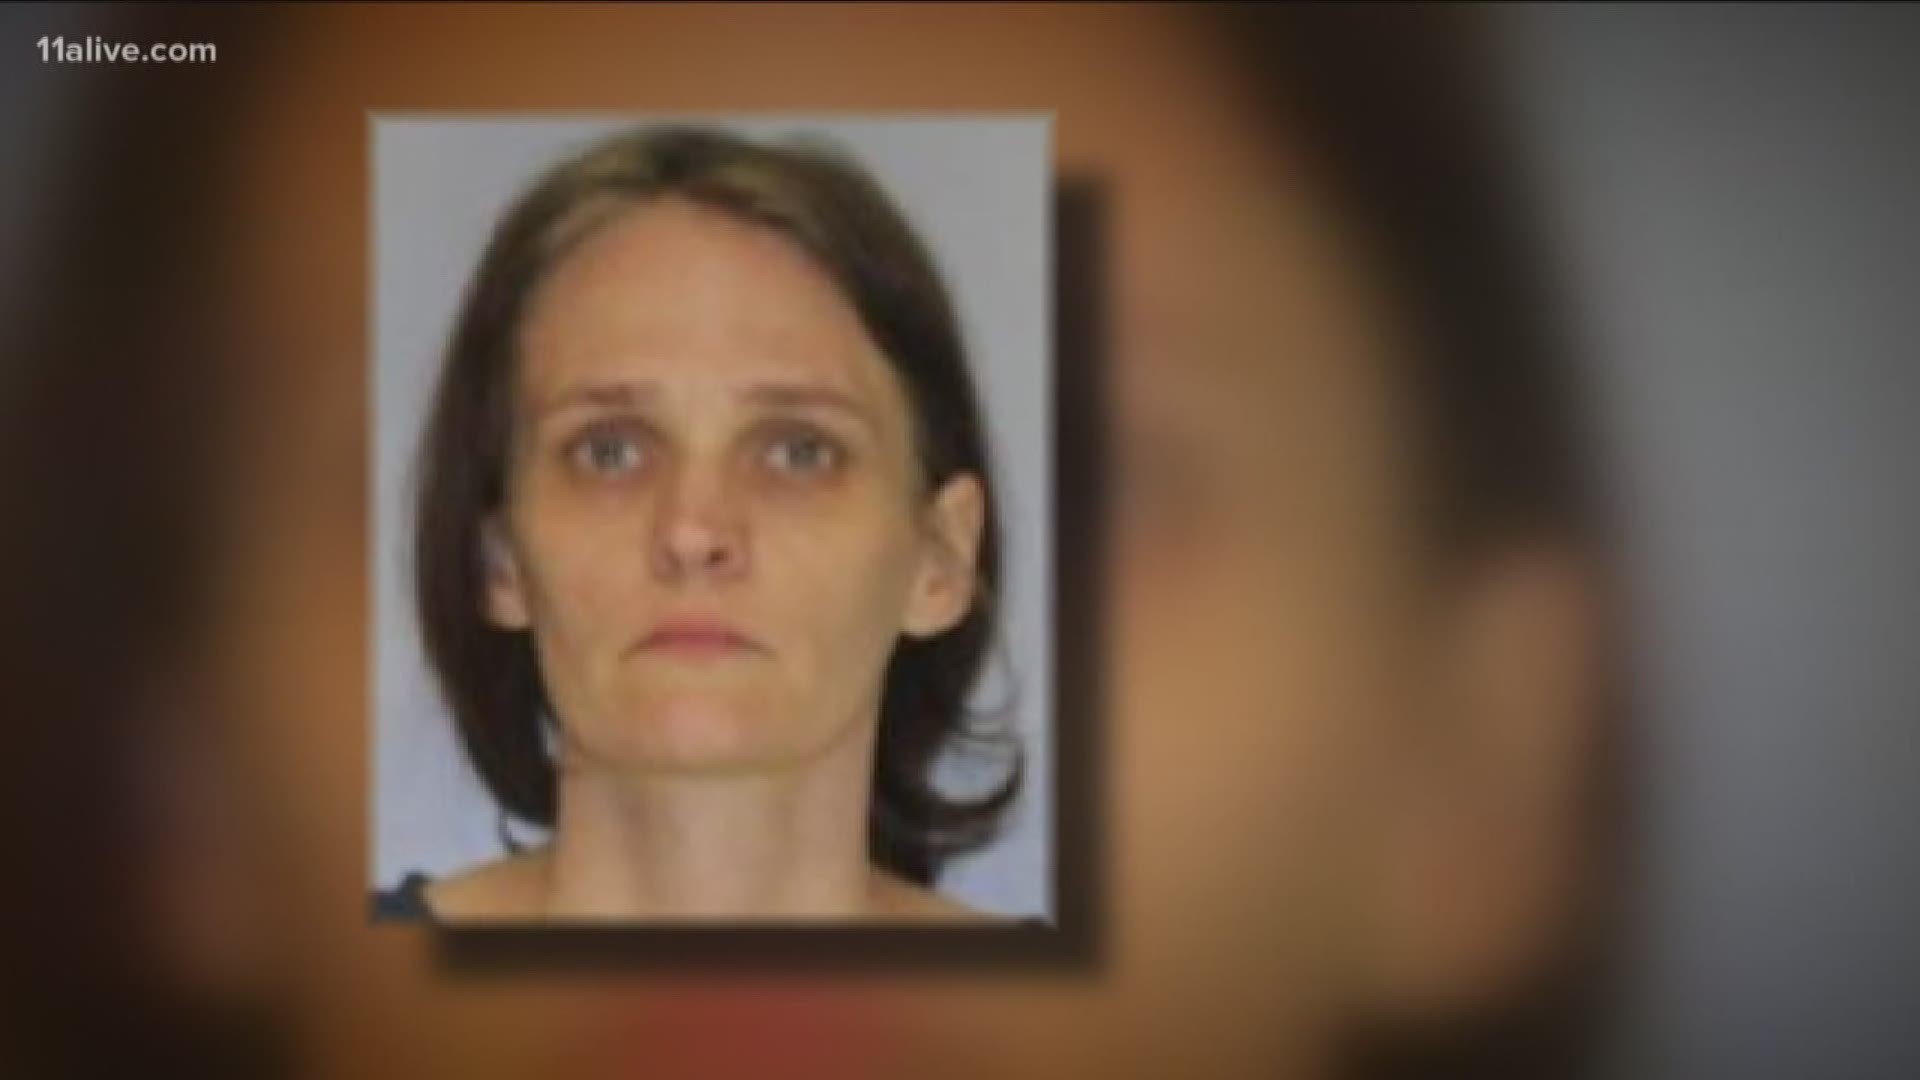 Officials in Hall County are releasing more information about a woman accused of faking her son’s illness and forcing him to use an unnecessary feeding tube and wheelchair, stating that more charges could be coming.